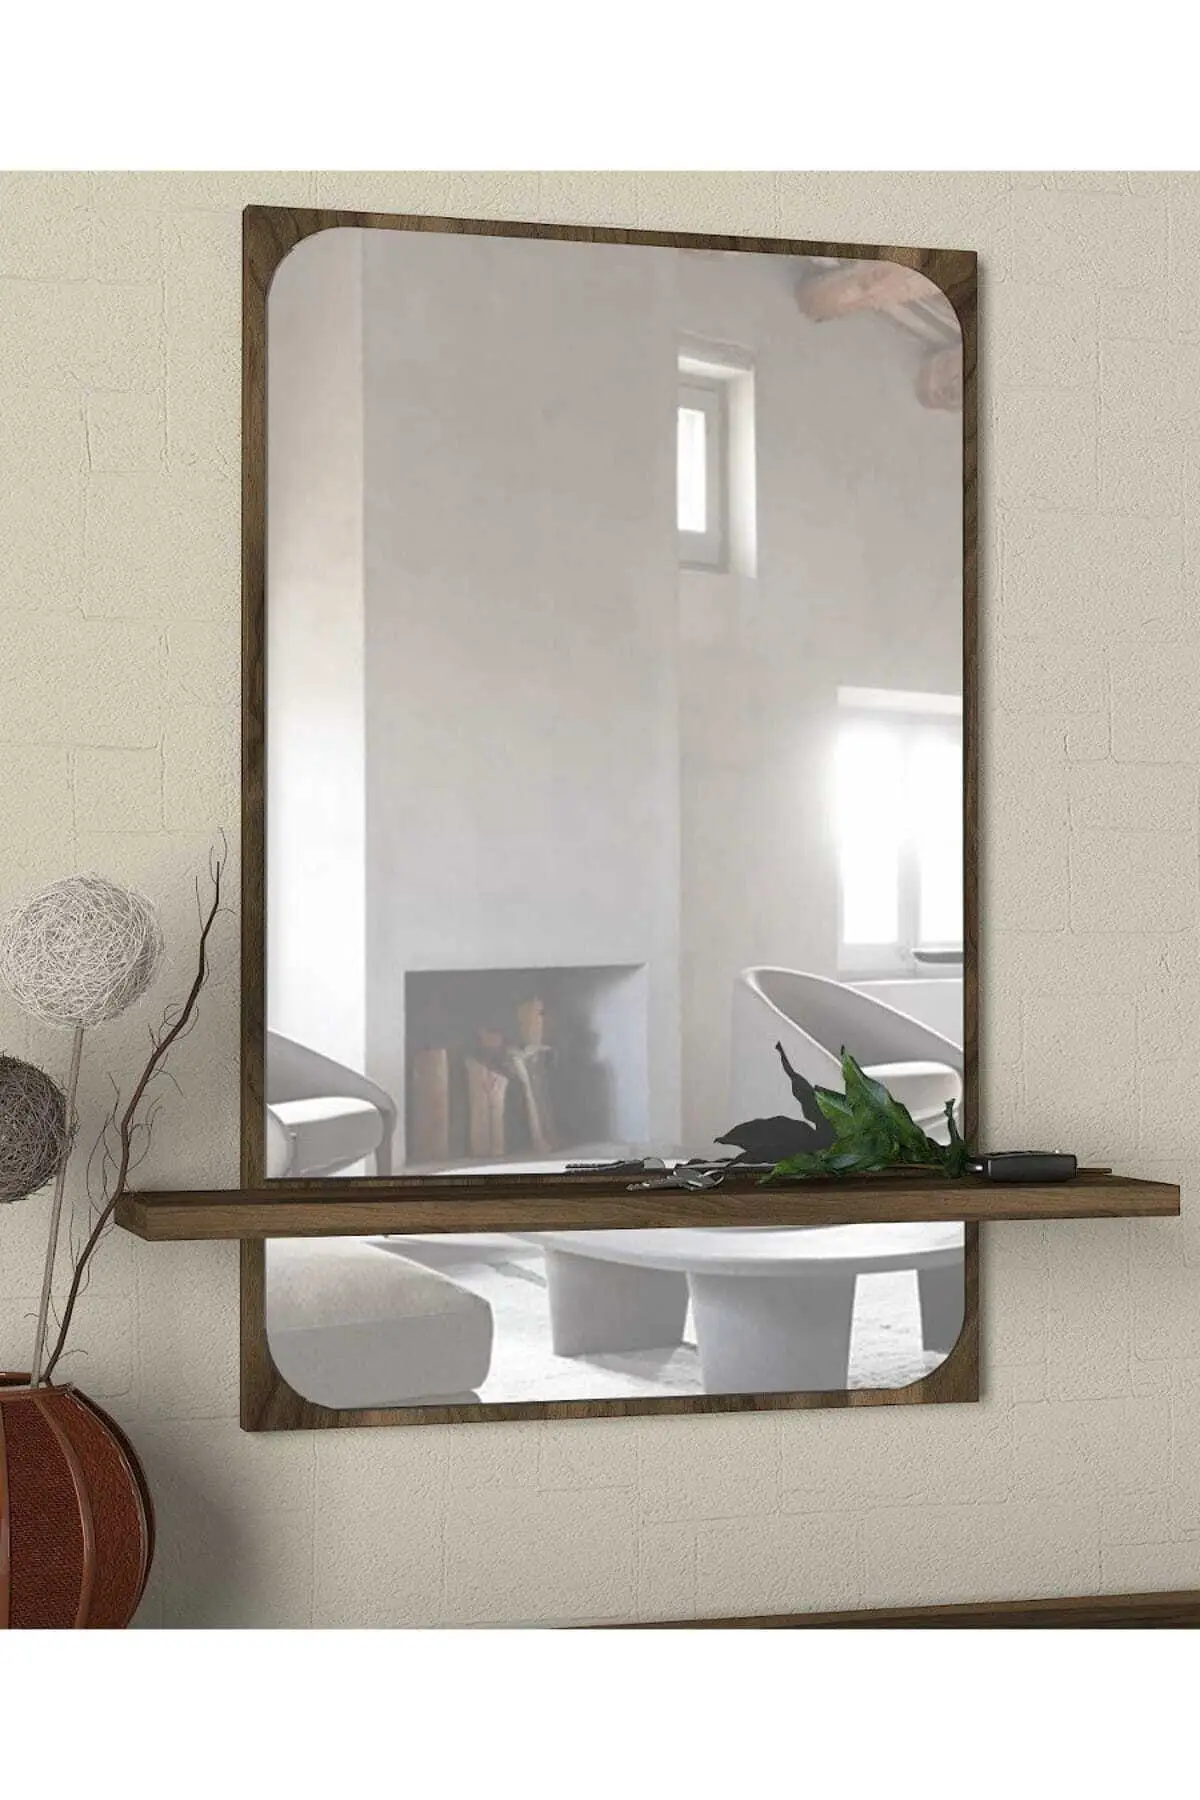 Decorative Wall Mirrors Console 45x70x12 cm Furniture Full Body Mirror Large Length Decor Bathroom Made In From Turkey images - 6